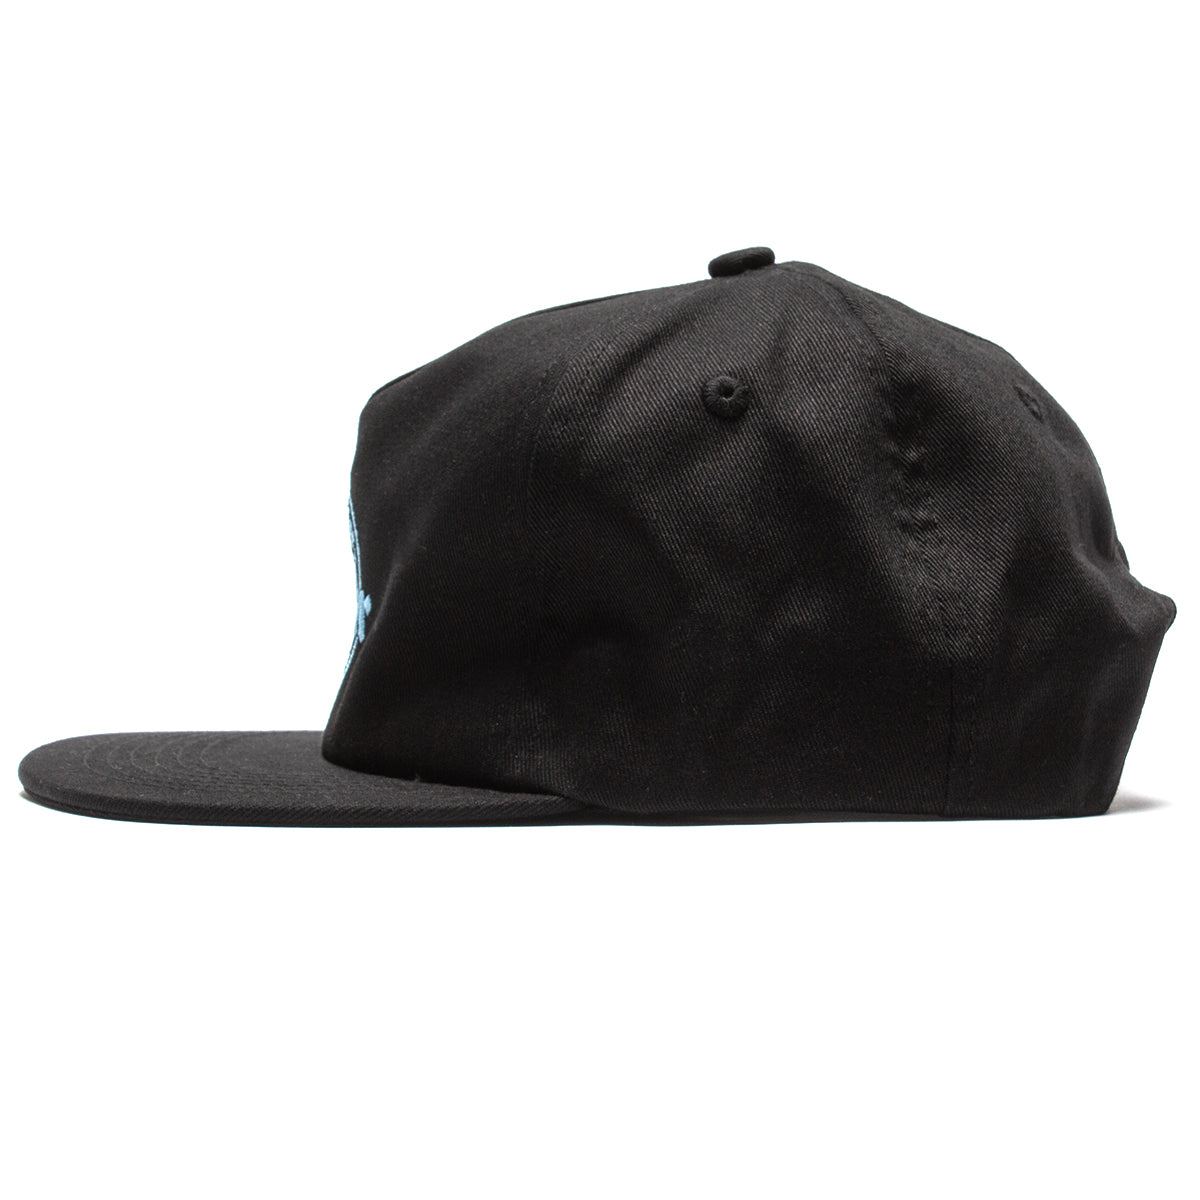 Thunder | Worldwide Hat Style # 50030042H00 Color : Black